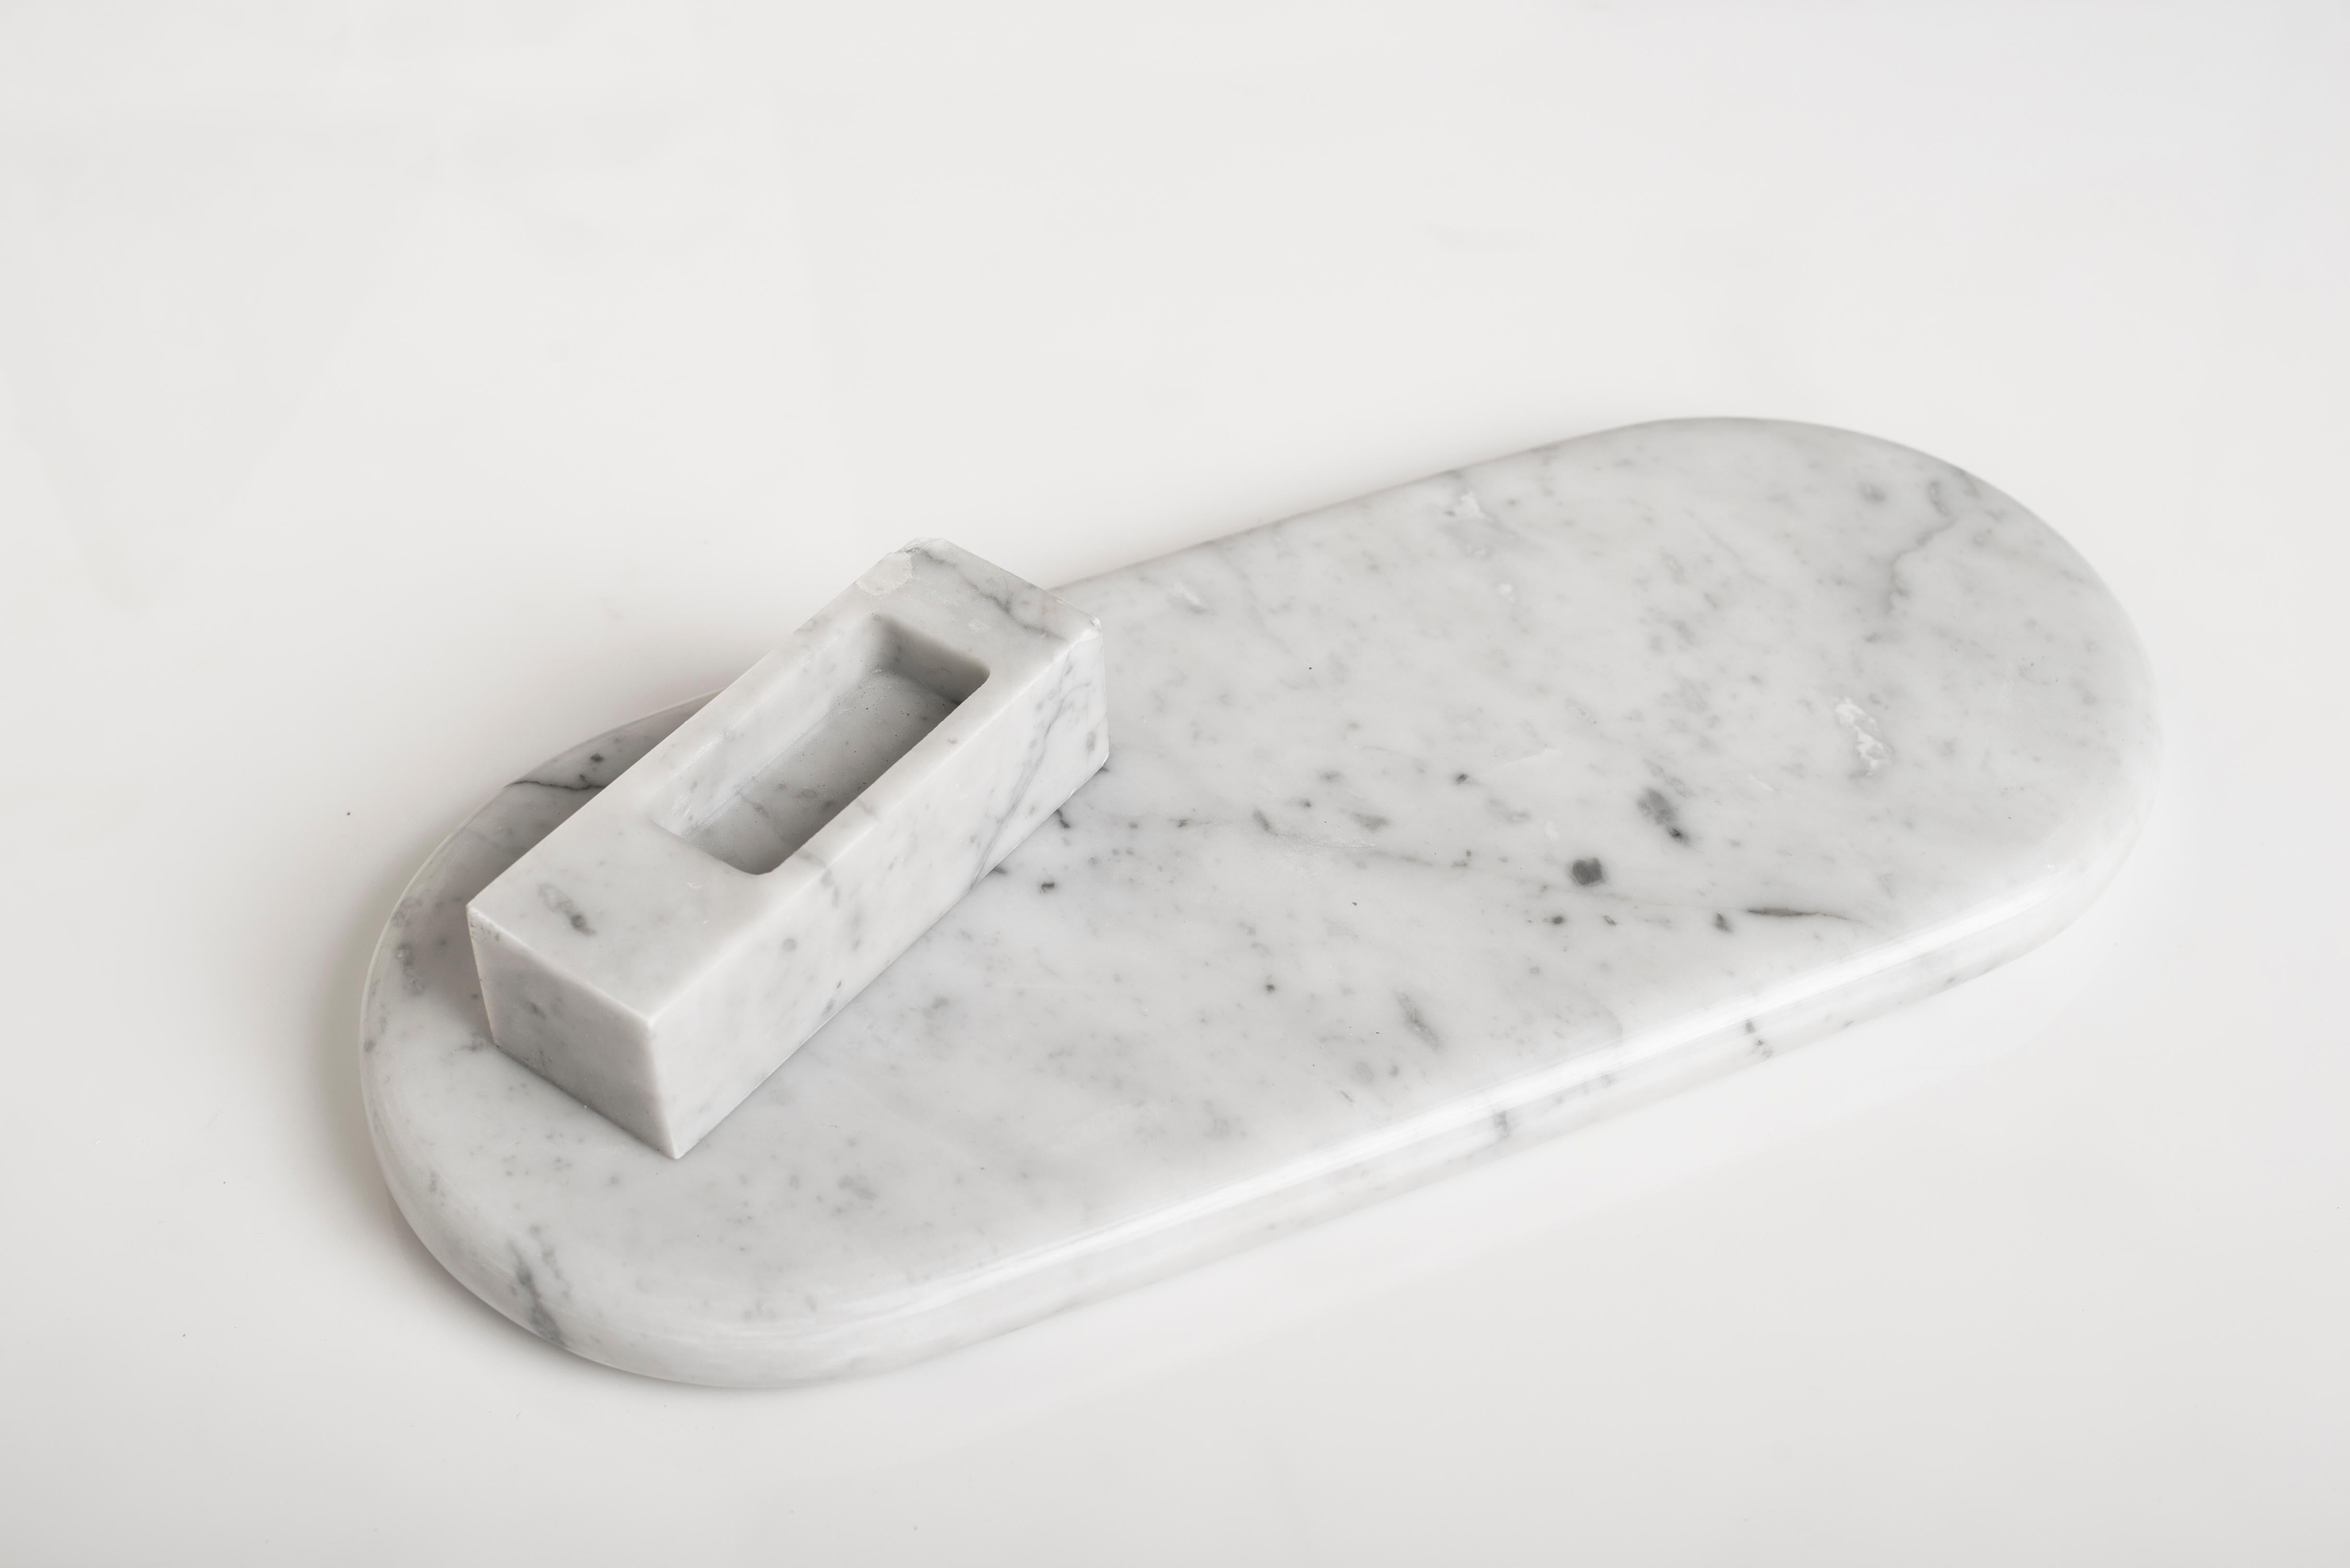 Brussels sculpture by Carlo Massoud
Handmade 
Dimensions: D 18 x W 45 x H 7 cm 
Materials: Carrara Marble

Carlo Massoud’s work stems from his relentless questioning of social, political, cultural, and environmental norms. He often pushes his